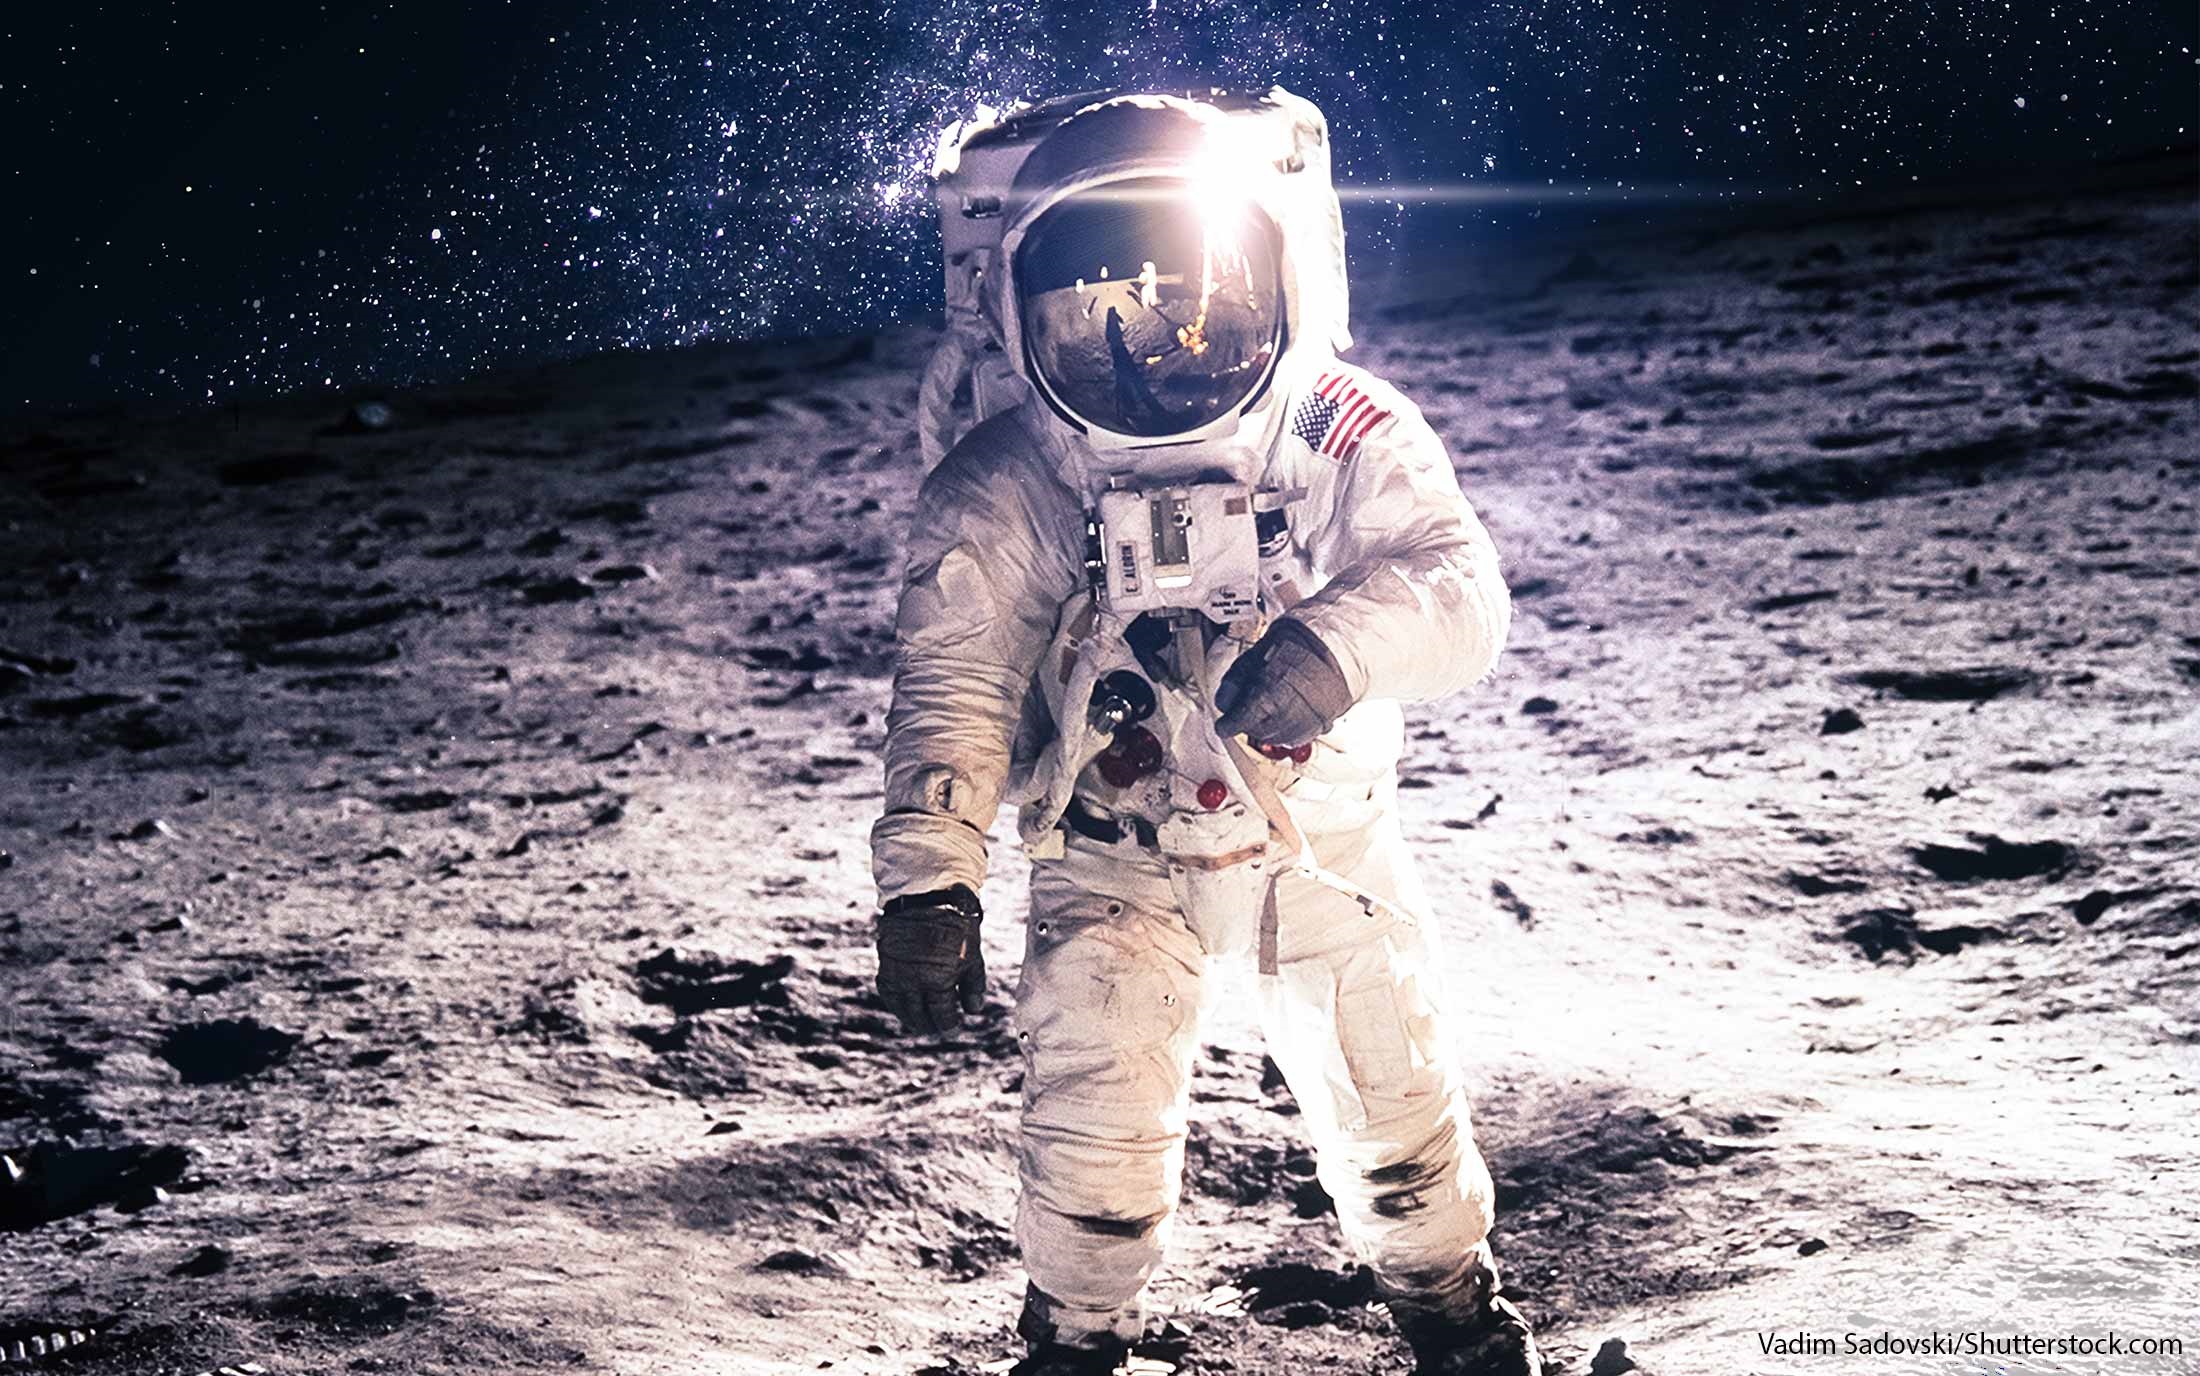 How much does the richest astronaut make?